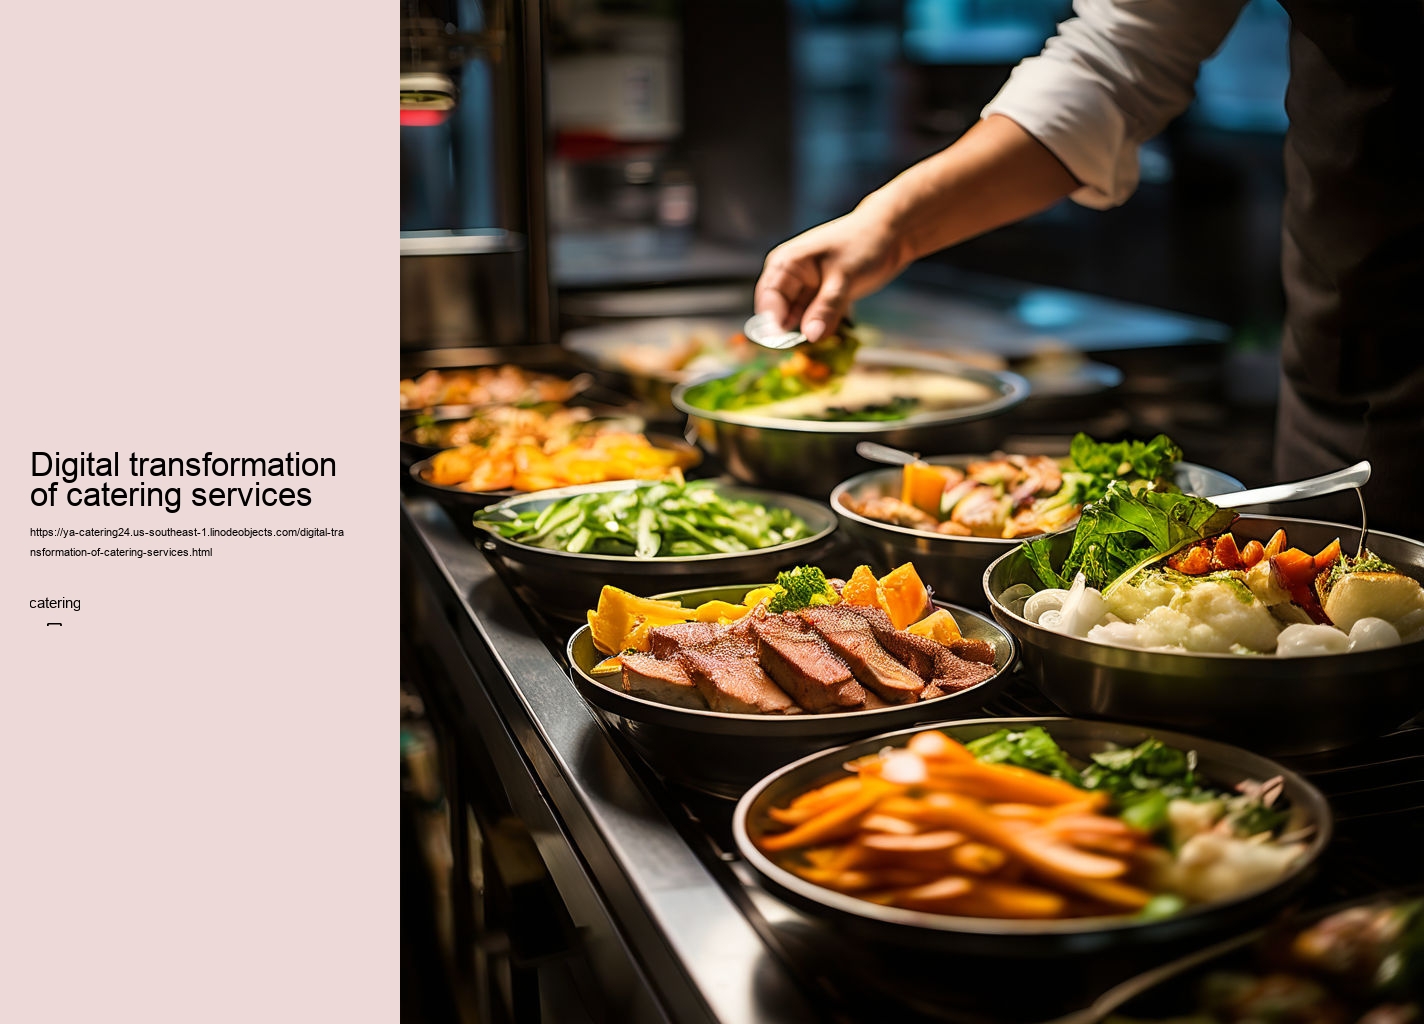 Digital transformation of catering services